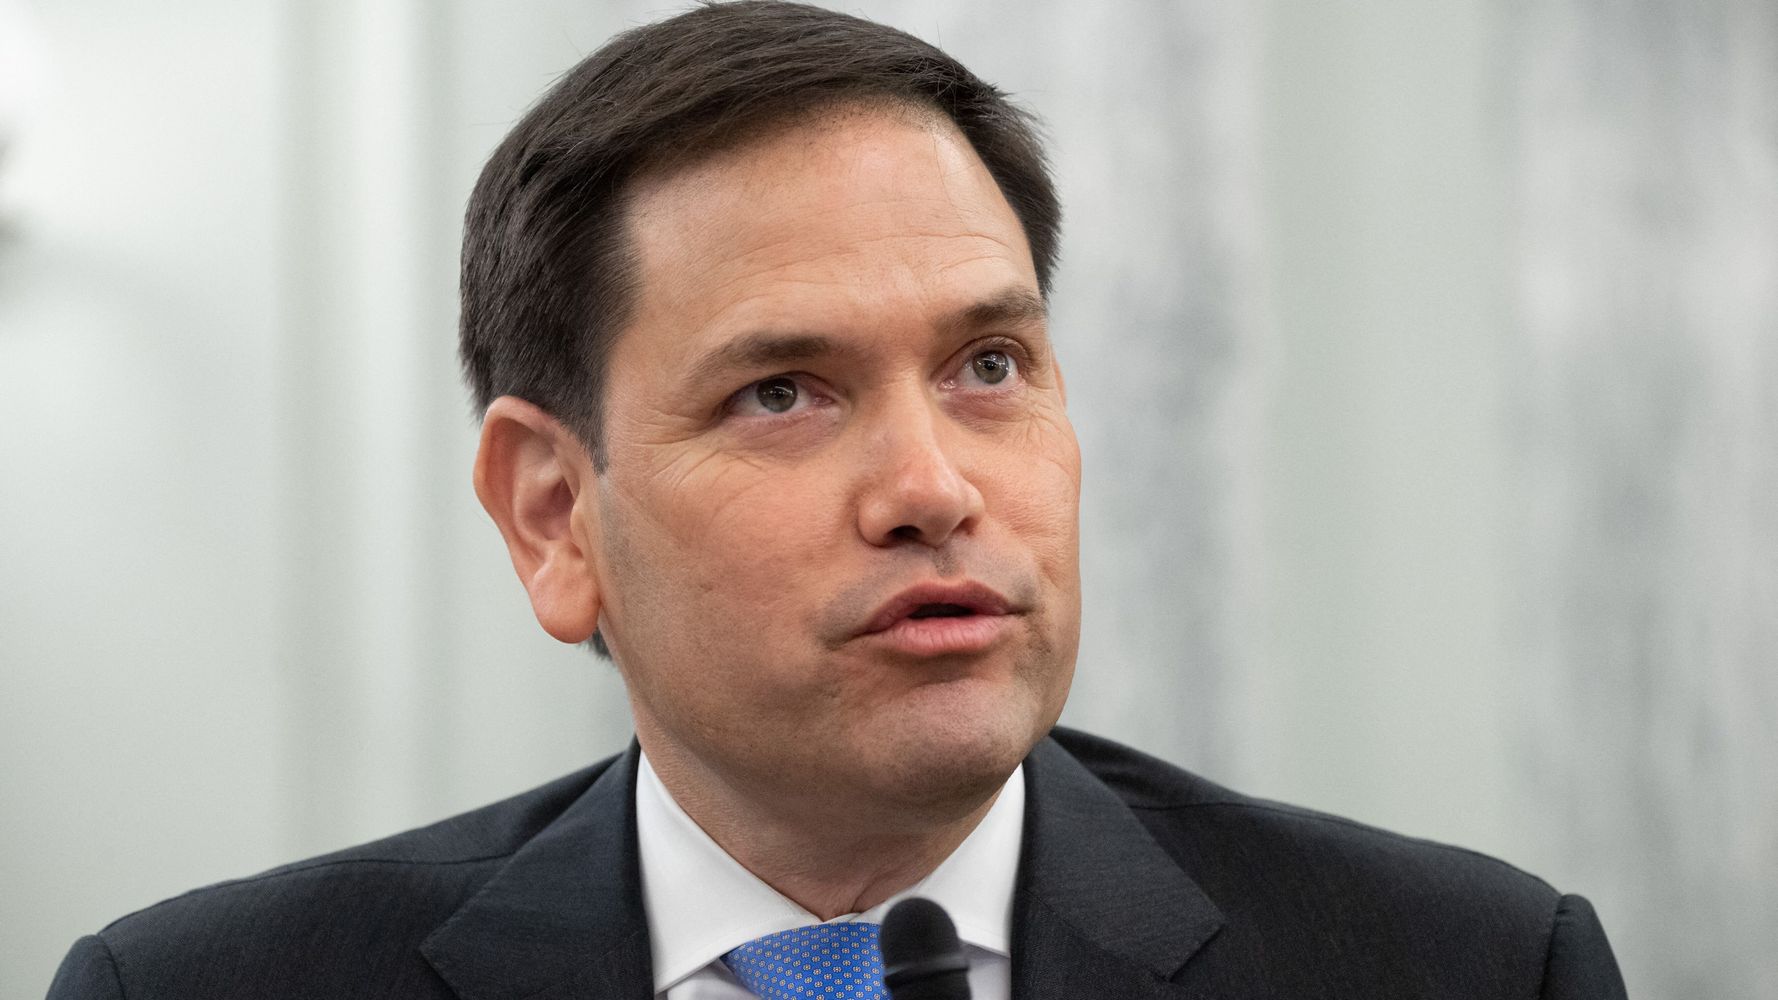 Twitter Users Mock Marco Rubio For Pathetic Brag About Trump's New Blog